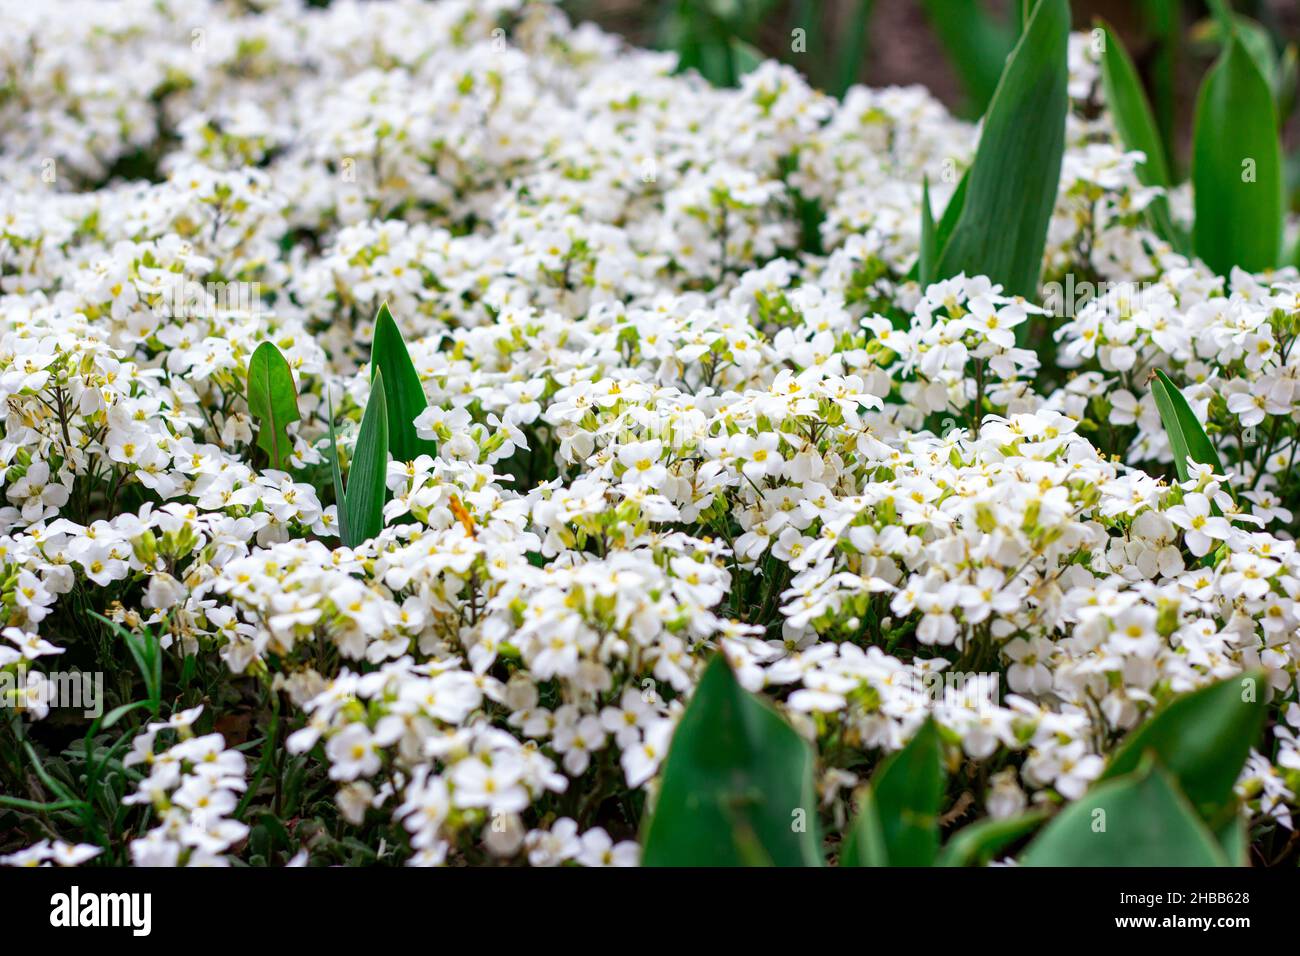 Fresh white Arabis caucasica blossoming flowers on green leaves background in the garden in spring season close up. Stock Photo